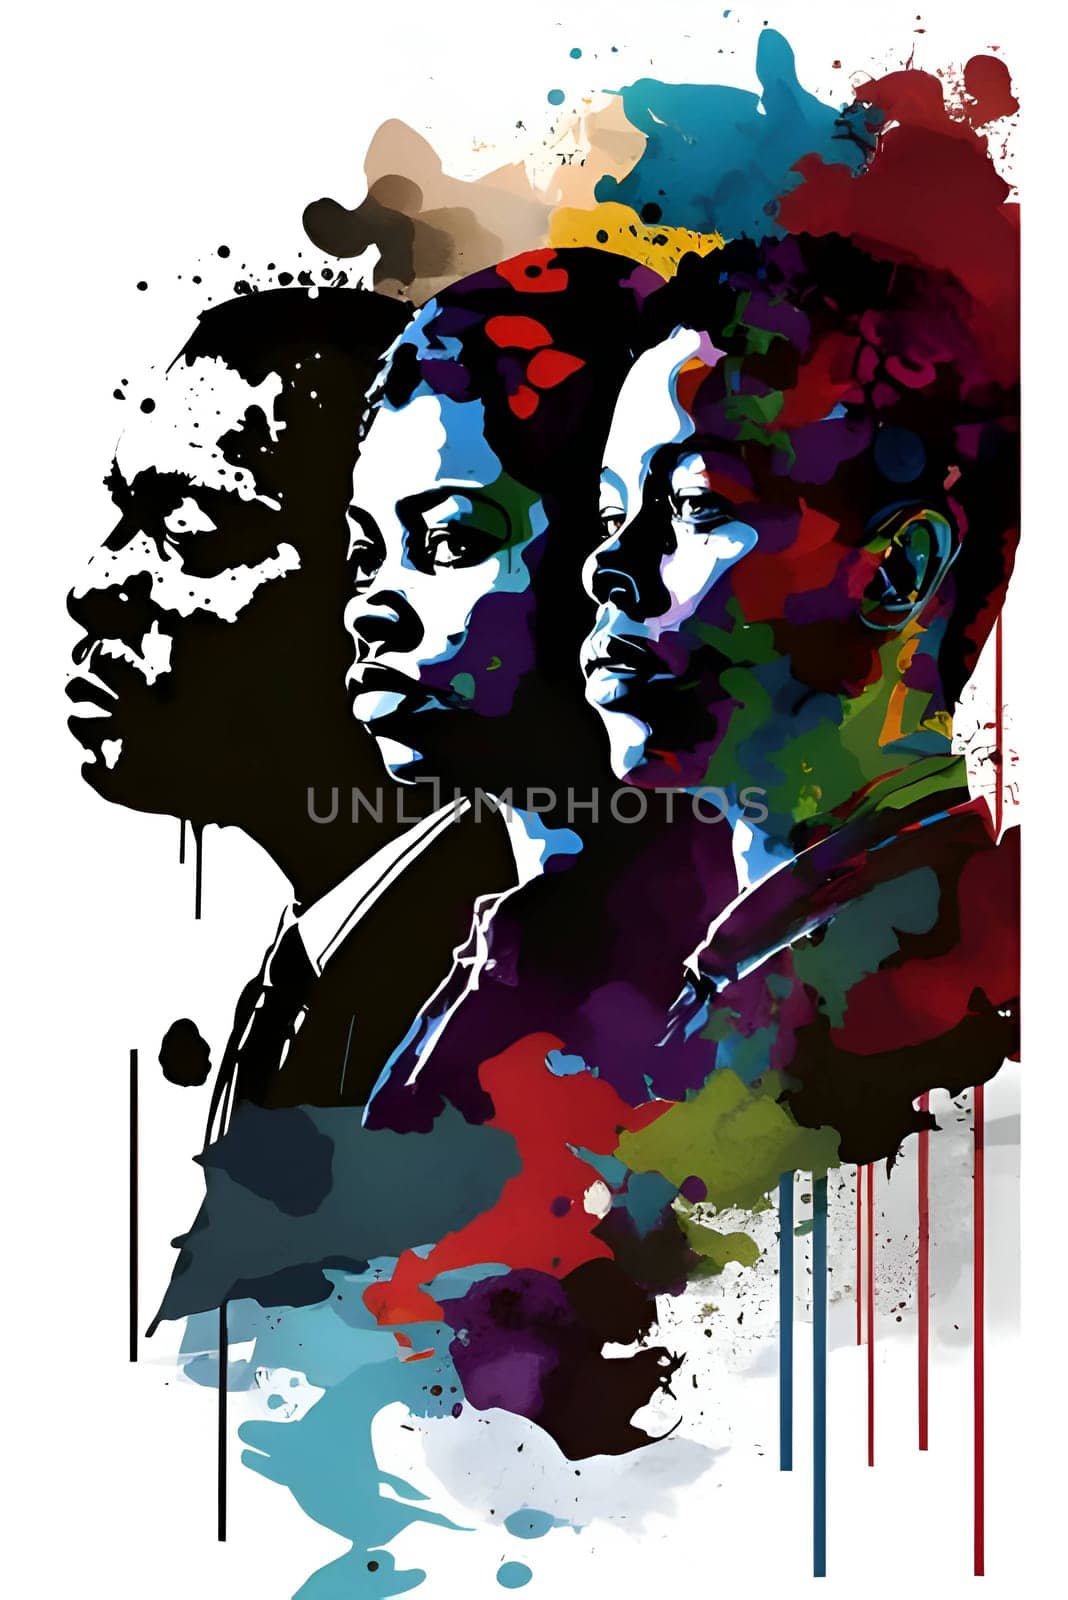 Vector illustration of people in colorful silhouette against a clean white background, capturing graceful forms.